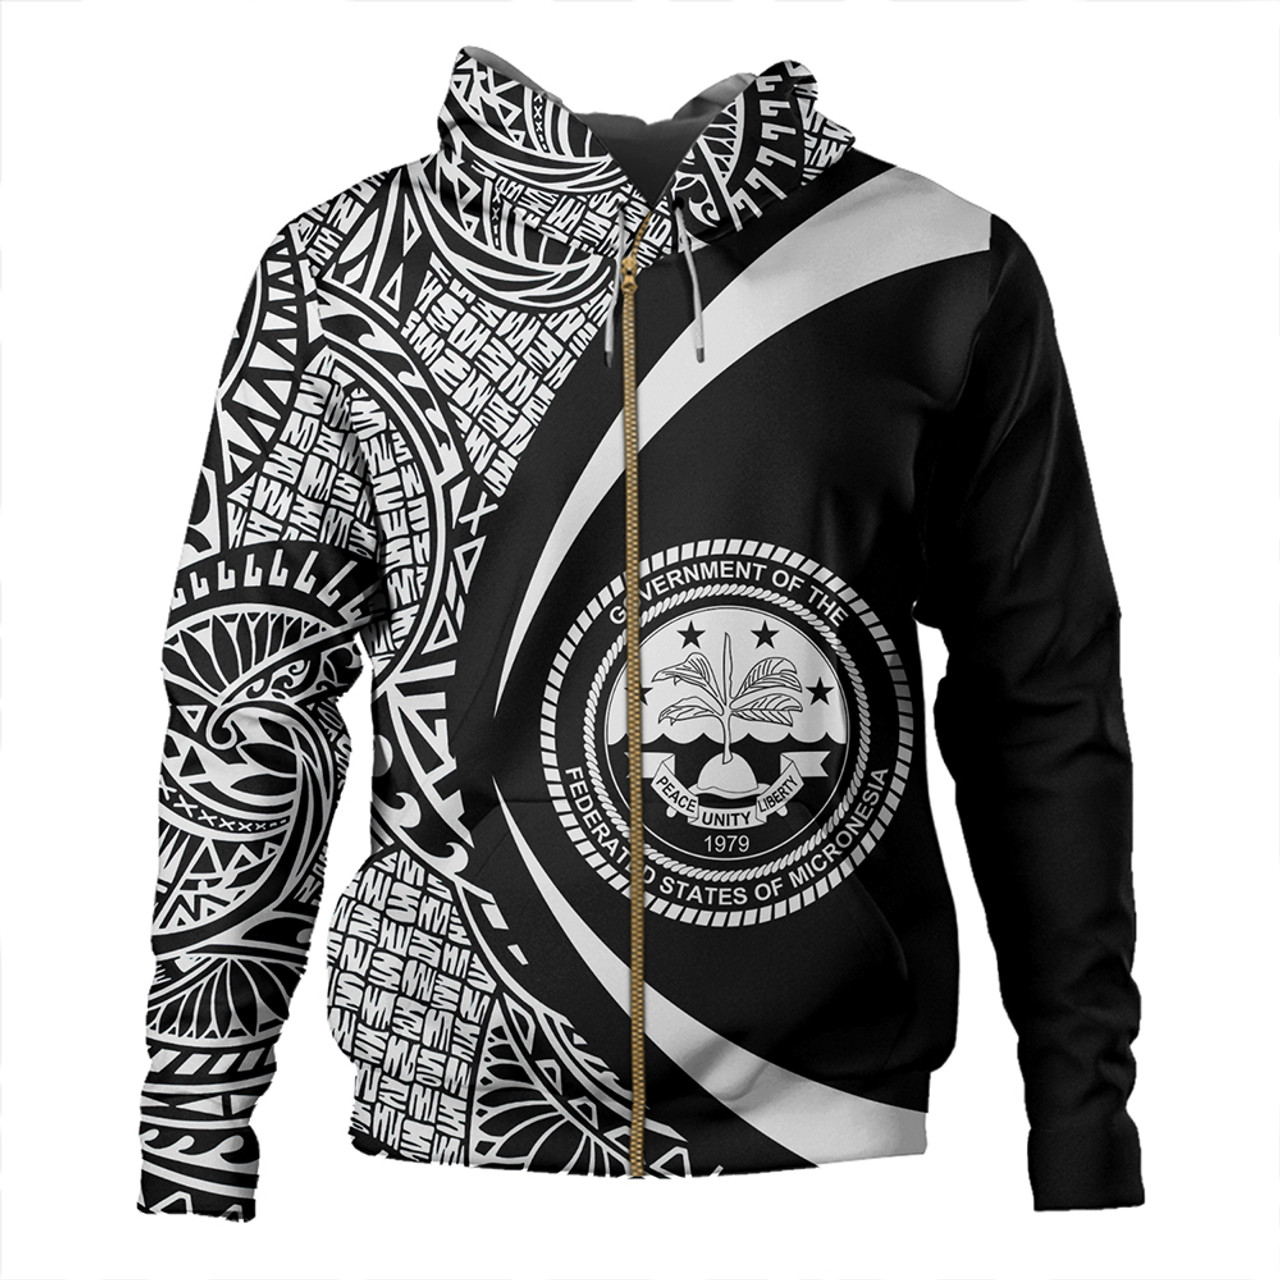 Federated States of Micronesia Hoodie Coat Of Arm Lauhala White Circle